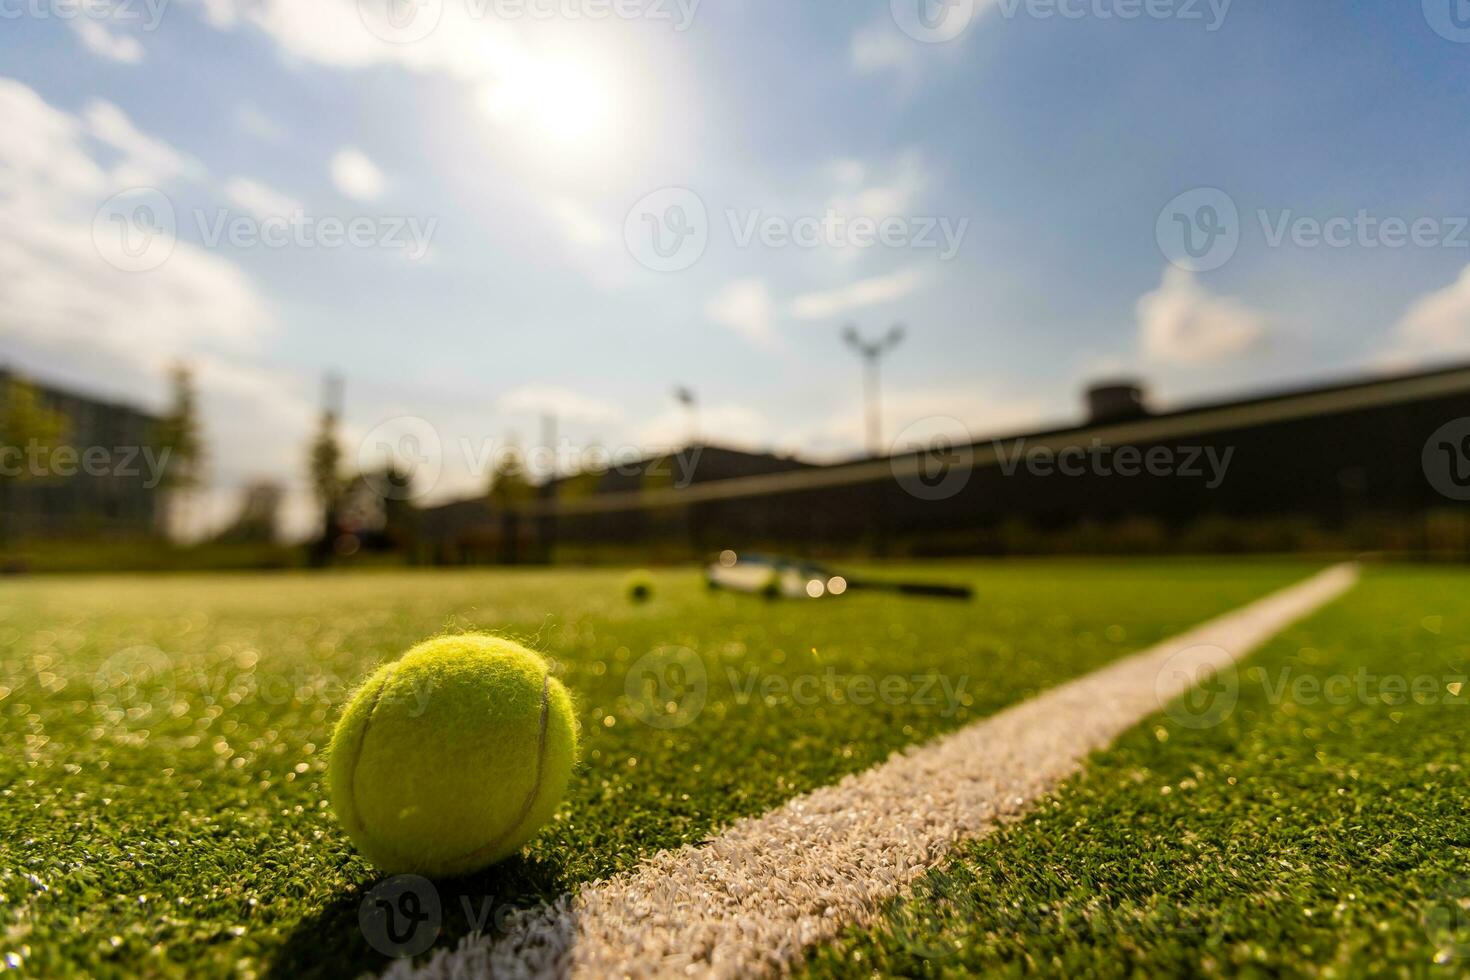 View of empty lawn tennis court with tennis ball photo